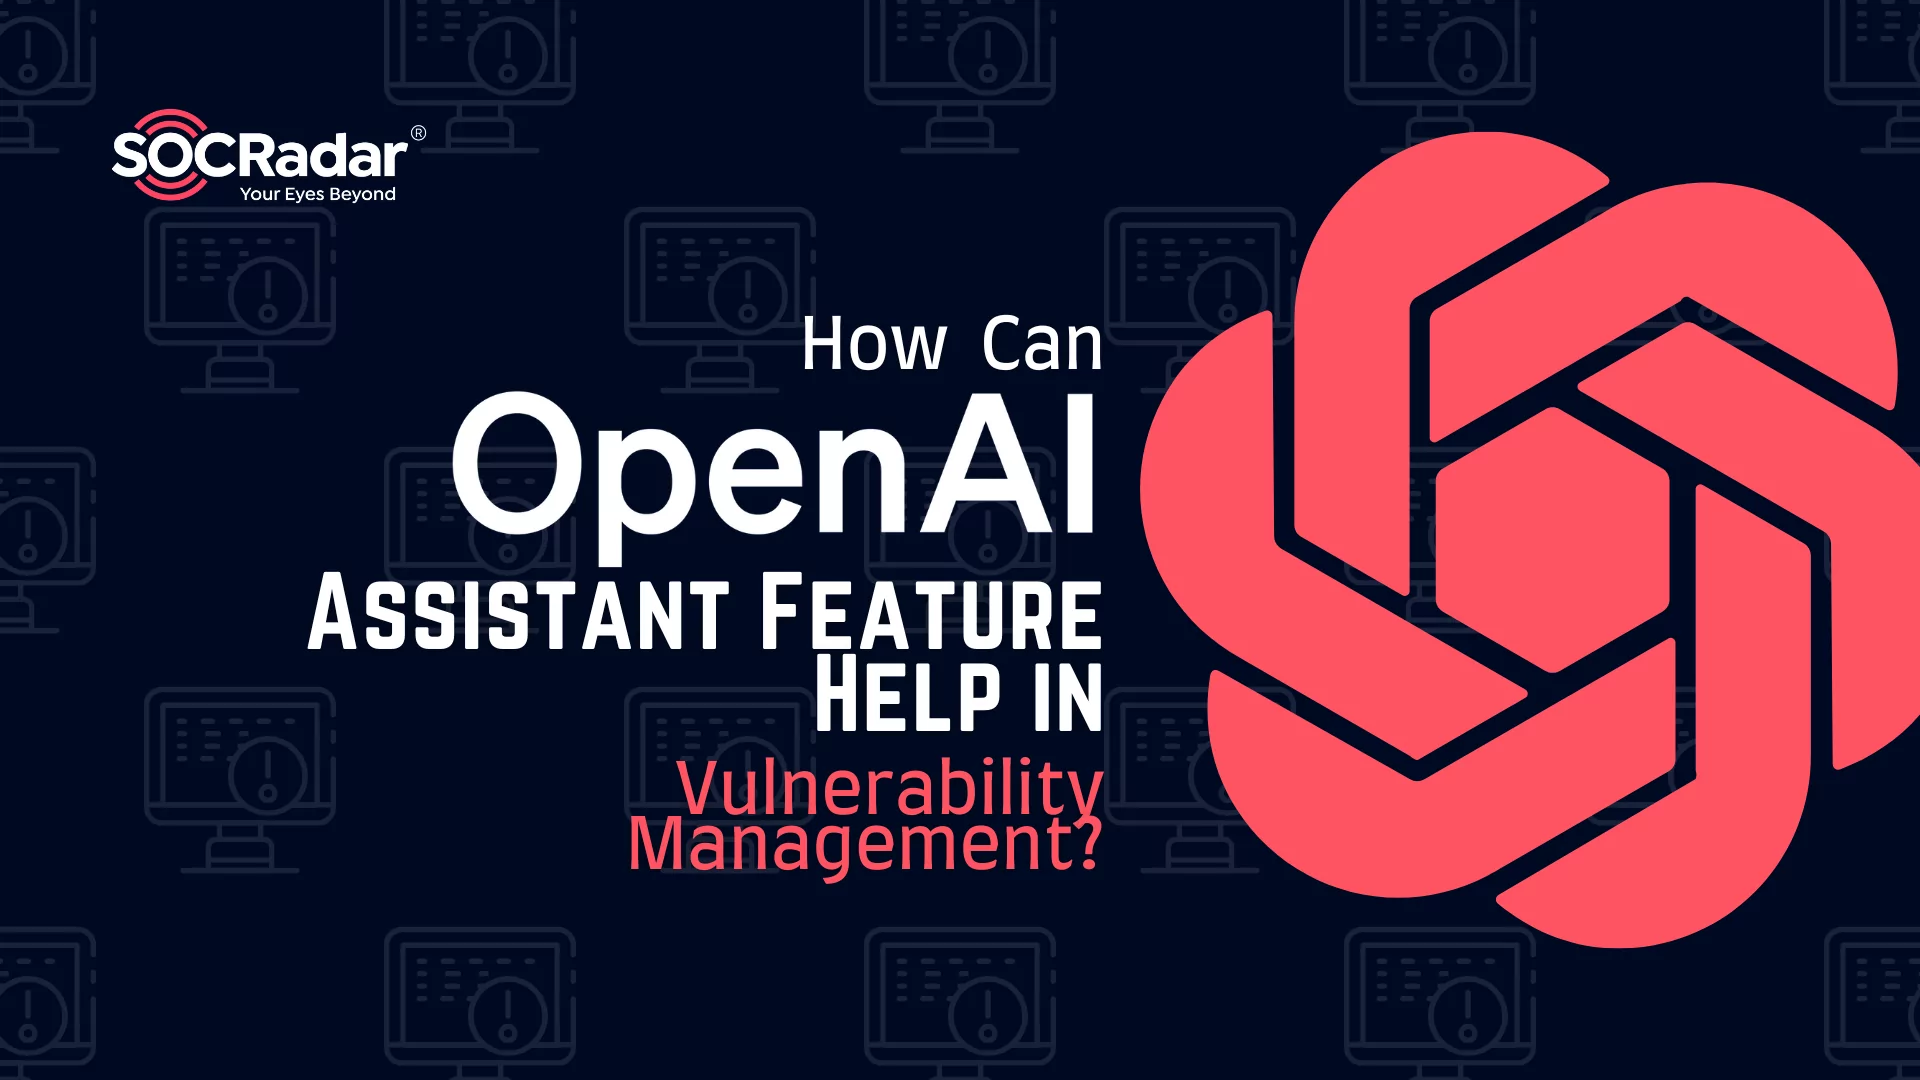 SOCRadar® Cyber Intelligence Inc. | How Can OpenAI Assistant Feature Help in Vulnerability Management?